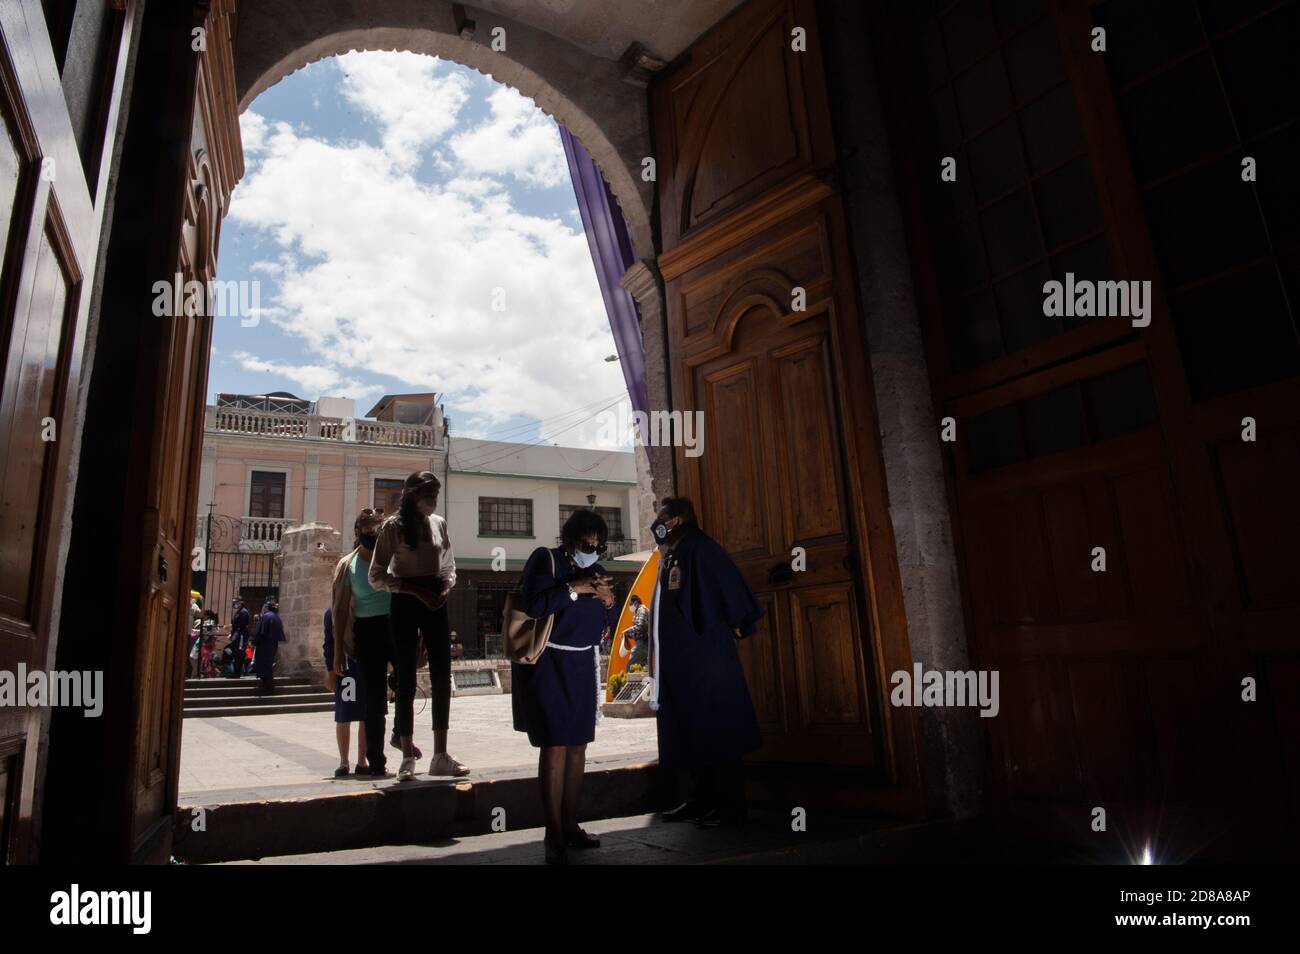 Believers in the 'Lord of Miracles' come to the temple of San Agustín (Arequipa) to pray to the image of the 'Purple Christ'. All health protocols wer Stock Photo